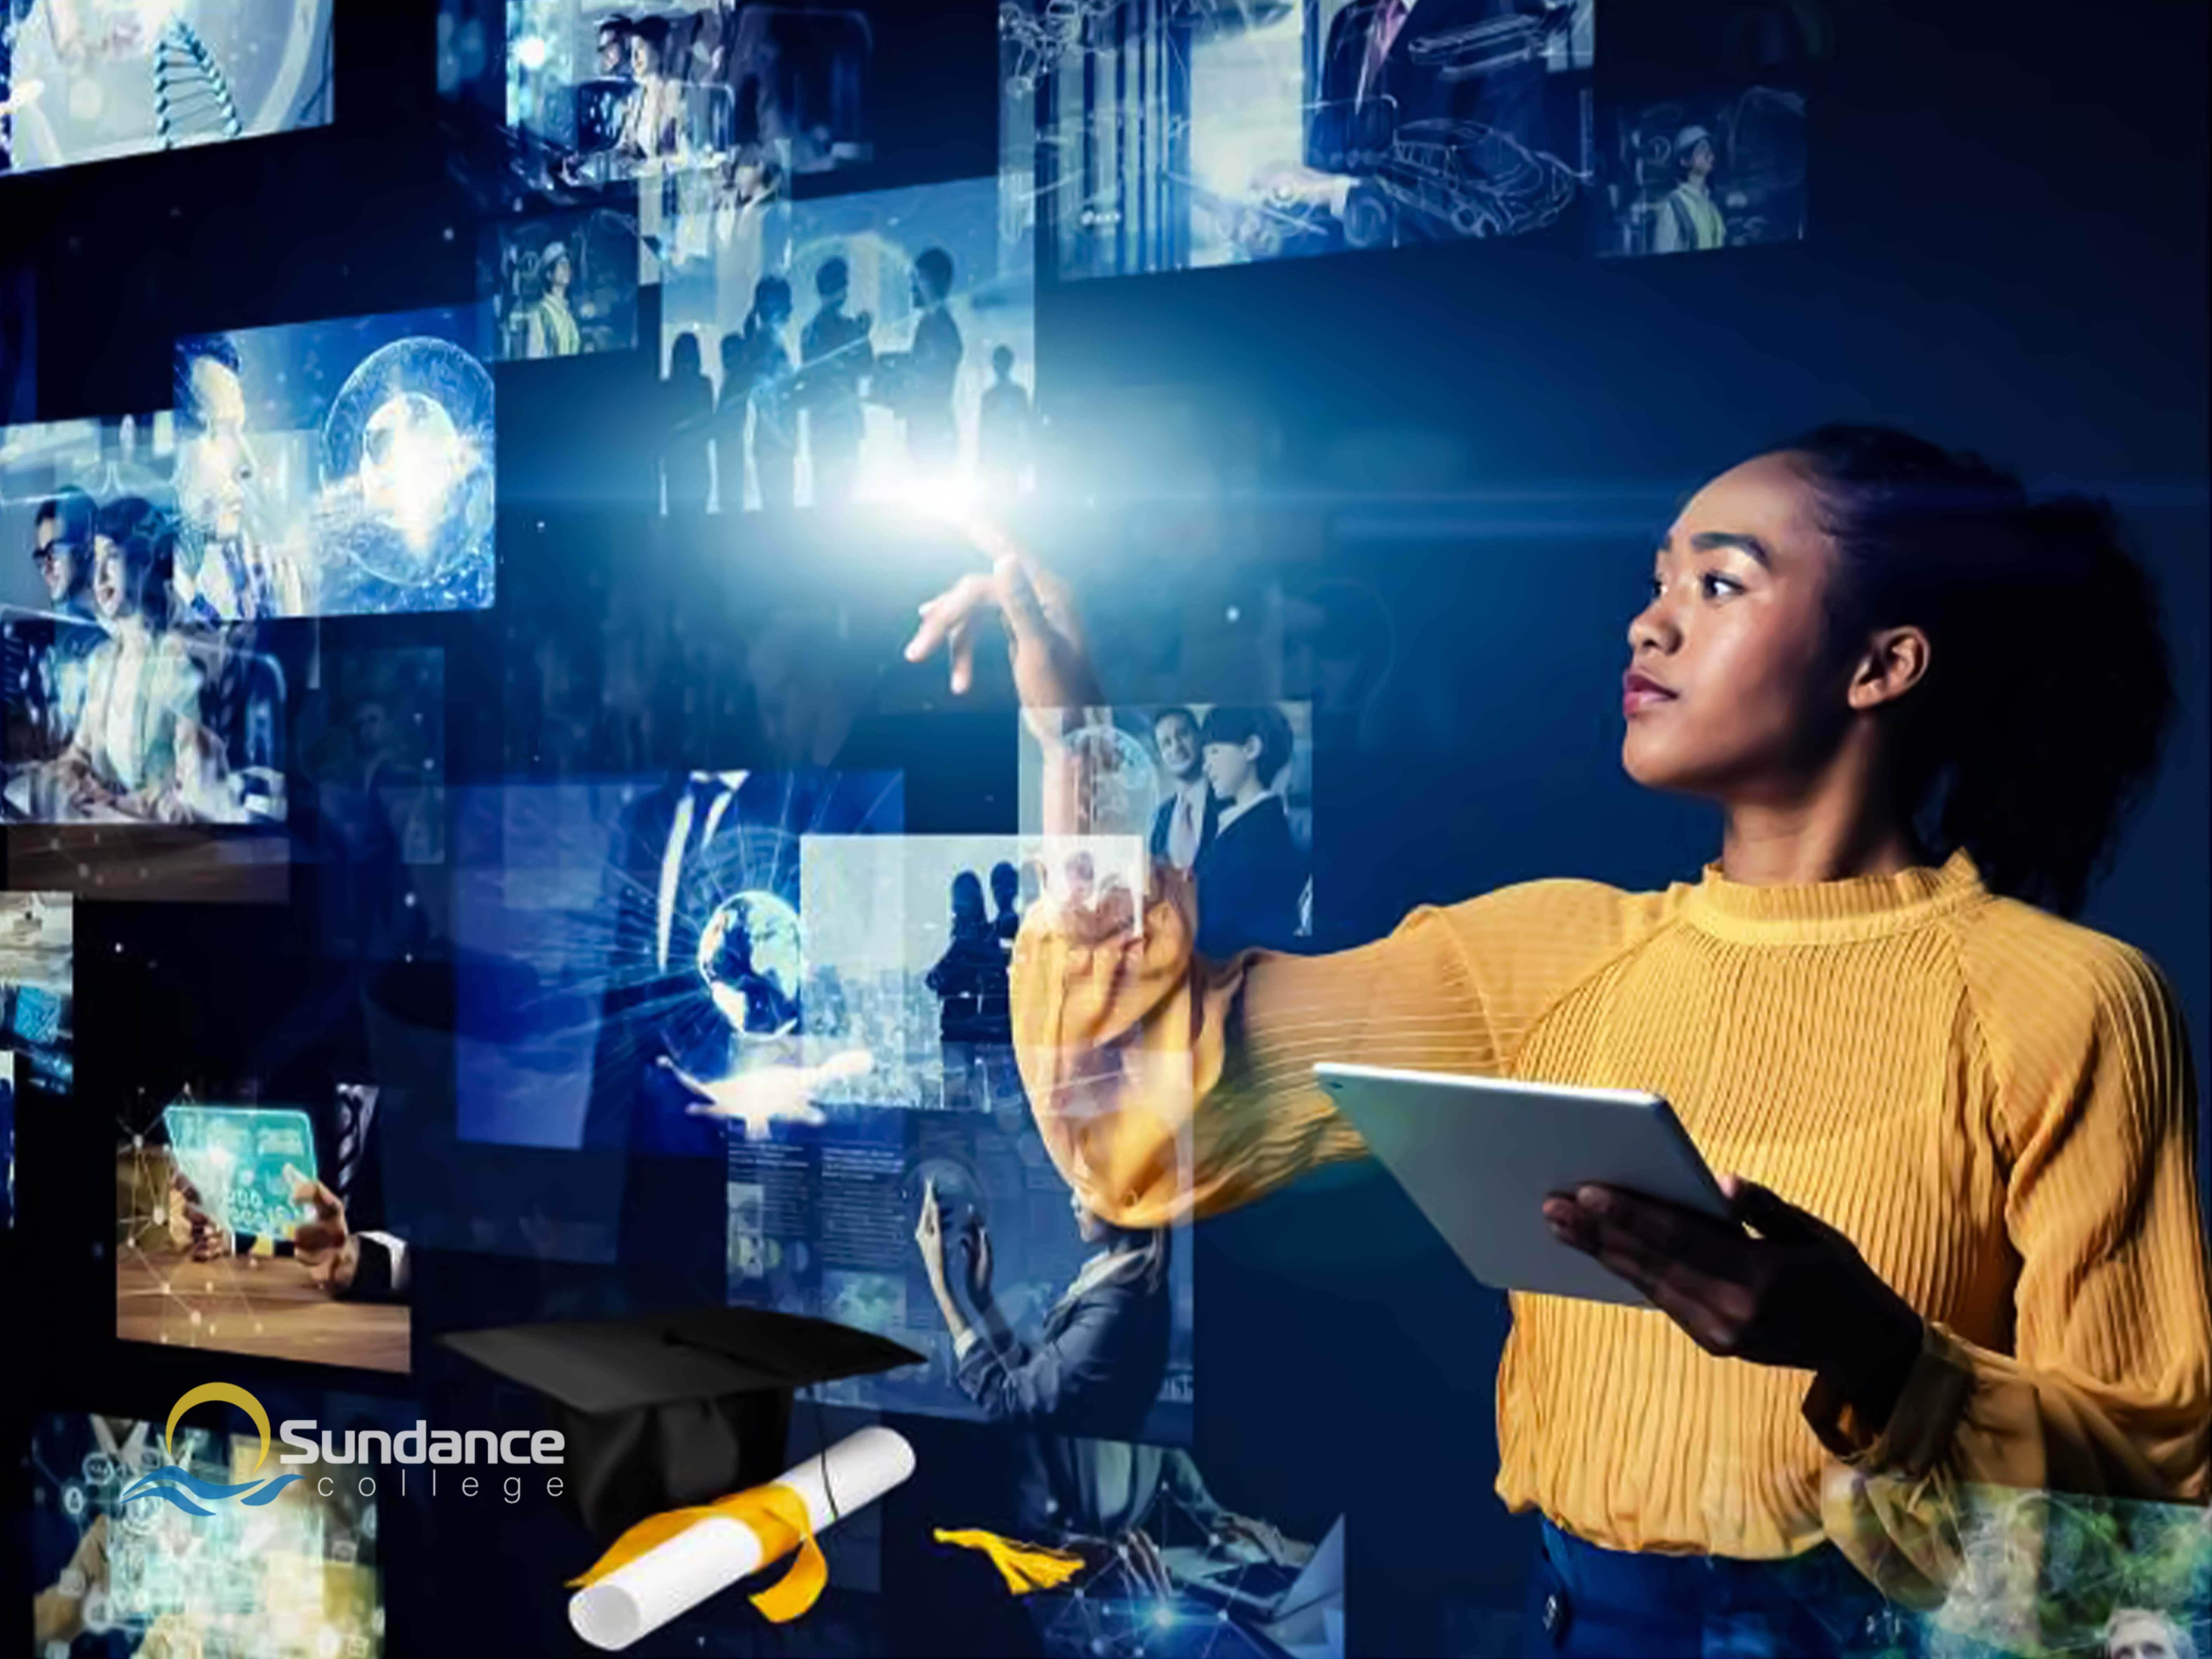 conceptual image of a digital marketing diploma graduate setting aside her cap and diploma to work on a figurative holographic social media dashboard